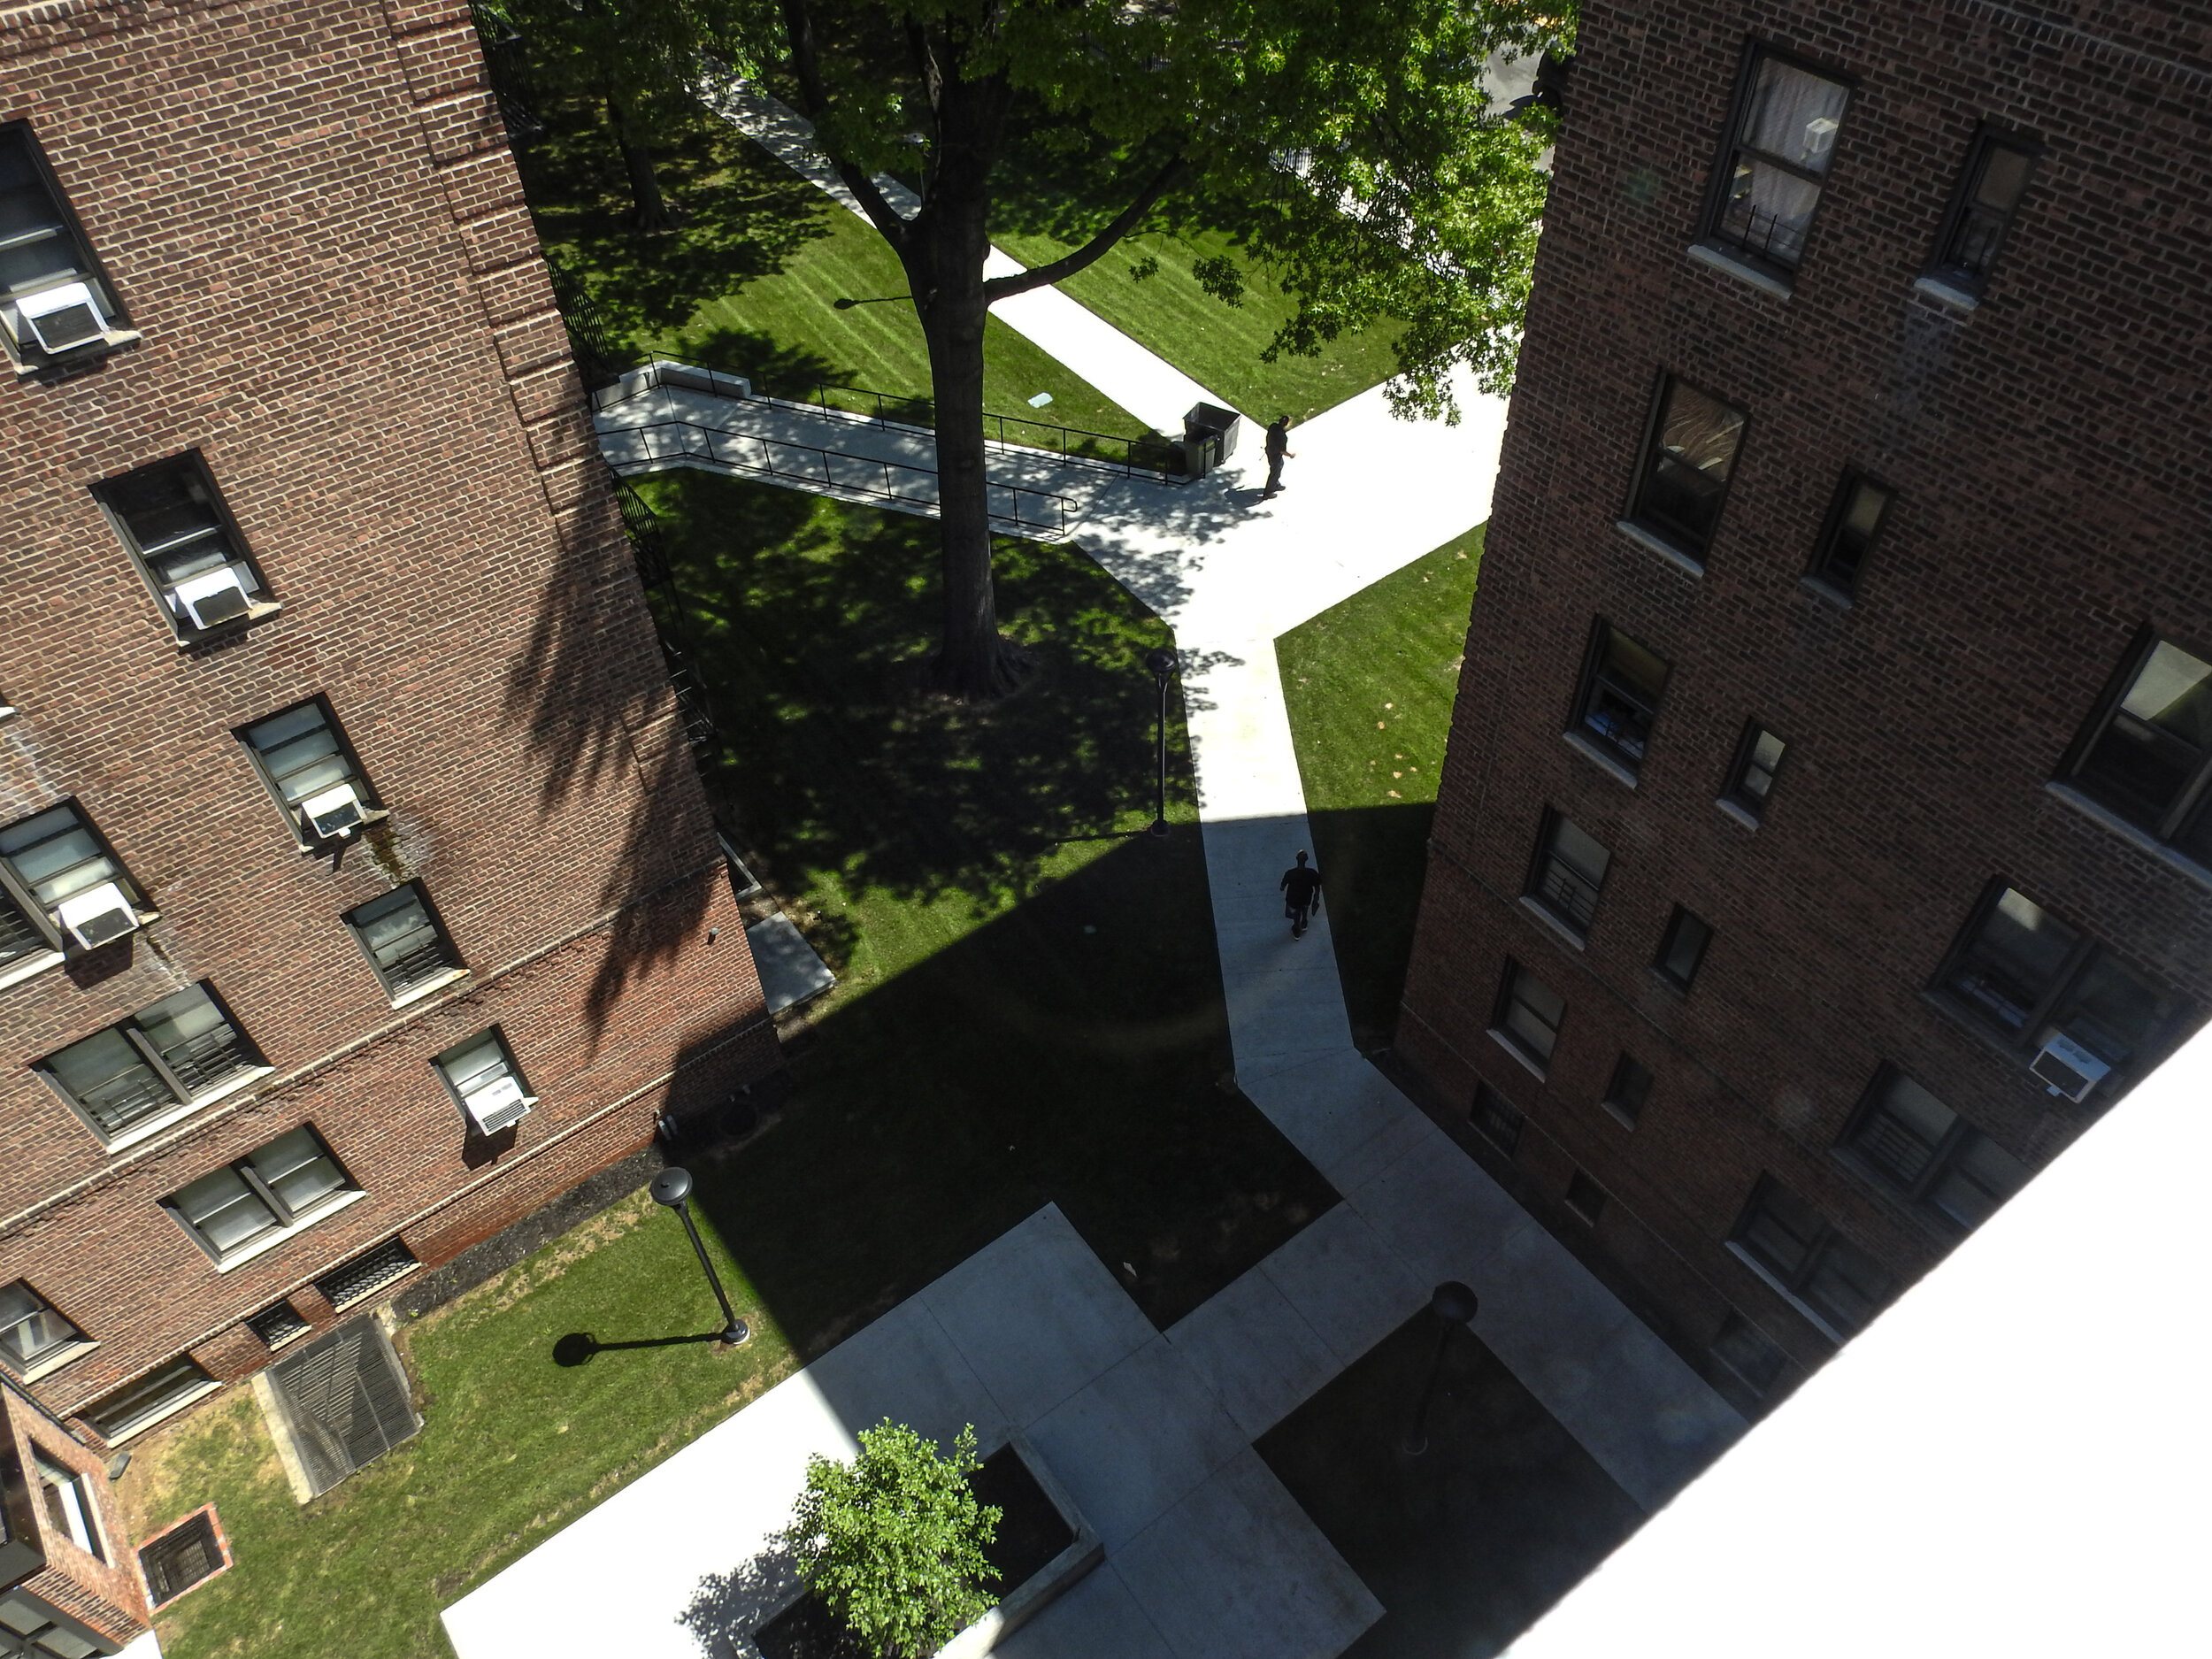 MorrisHeightsCourtyard_View_From_Above.jpg